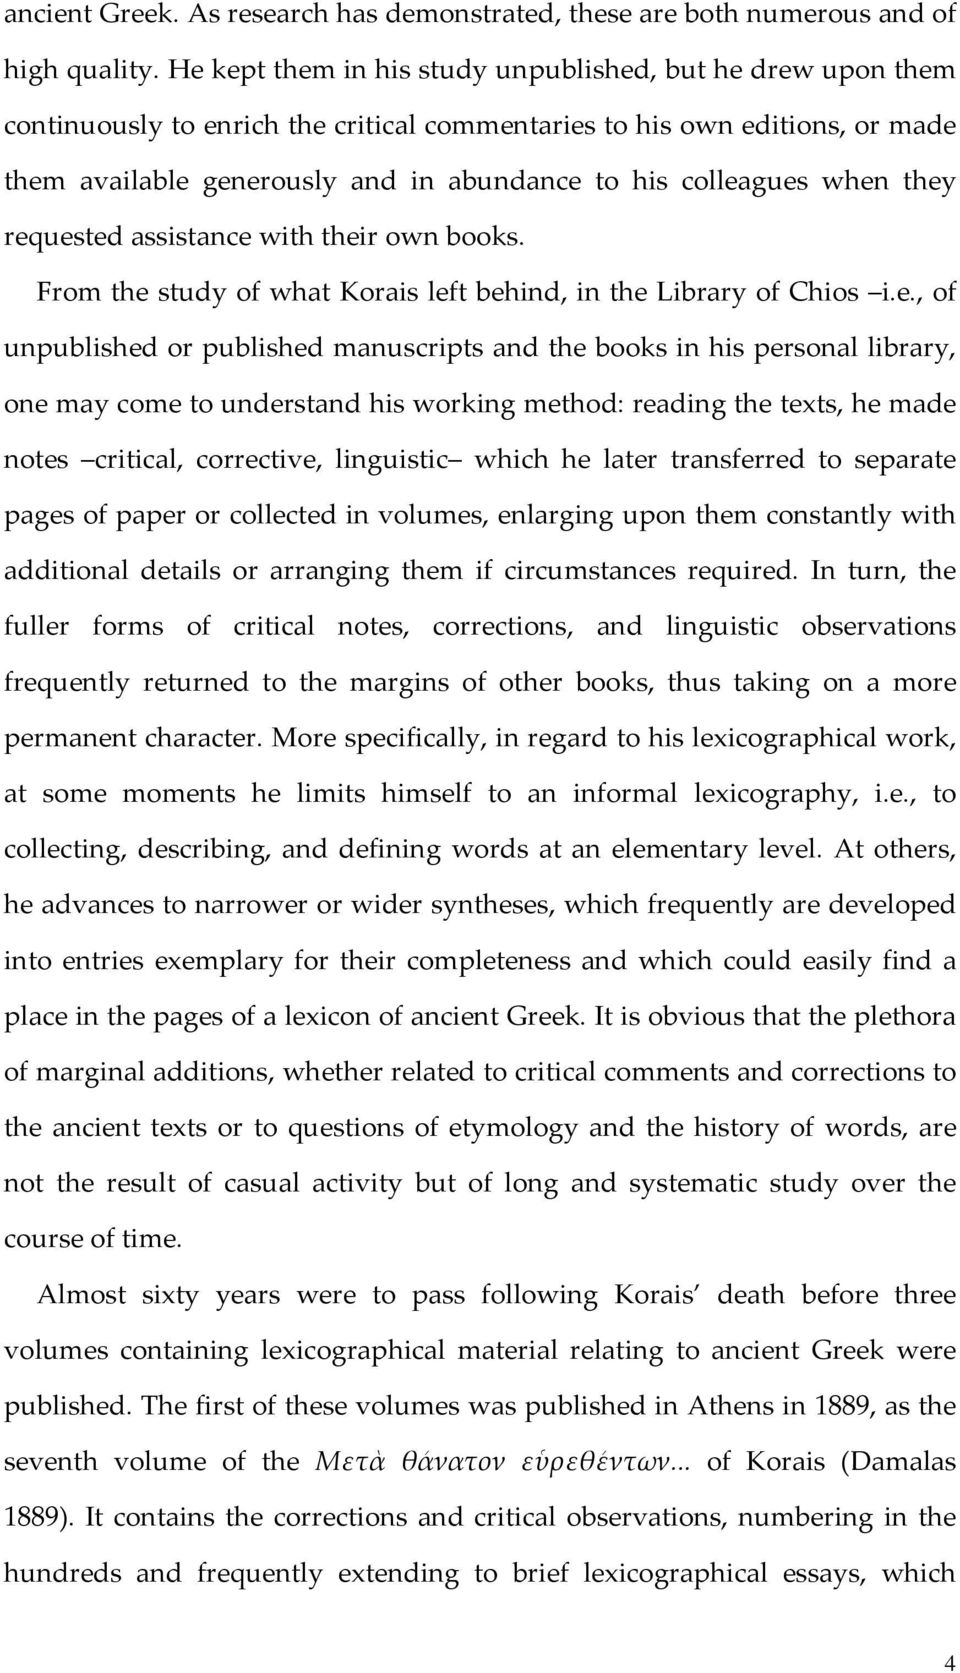 when they requested assistance with their own books. From the study of what Korais left behind, in the Library of Chios i.e., of unpublished or published manuscripts and the books in his personal